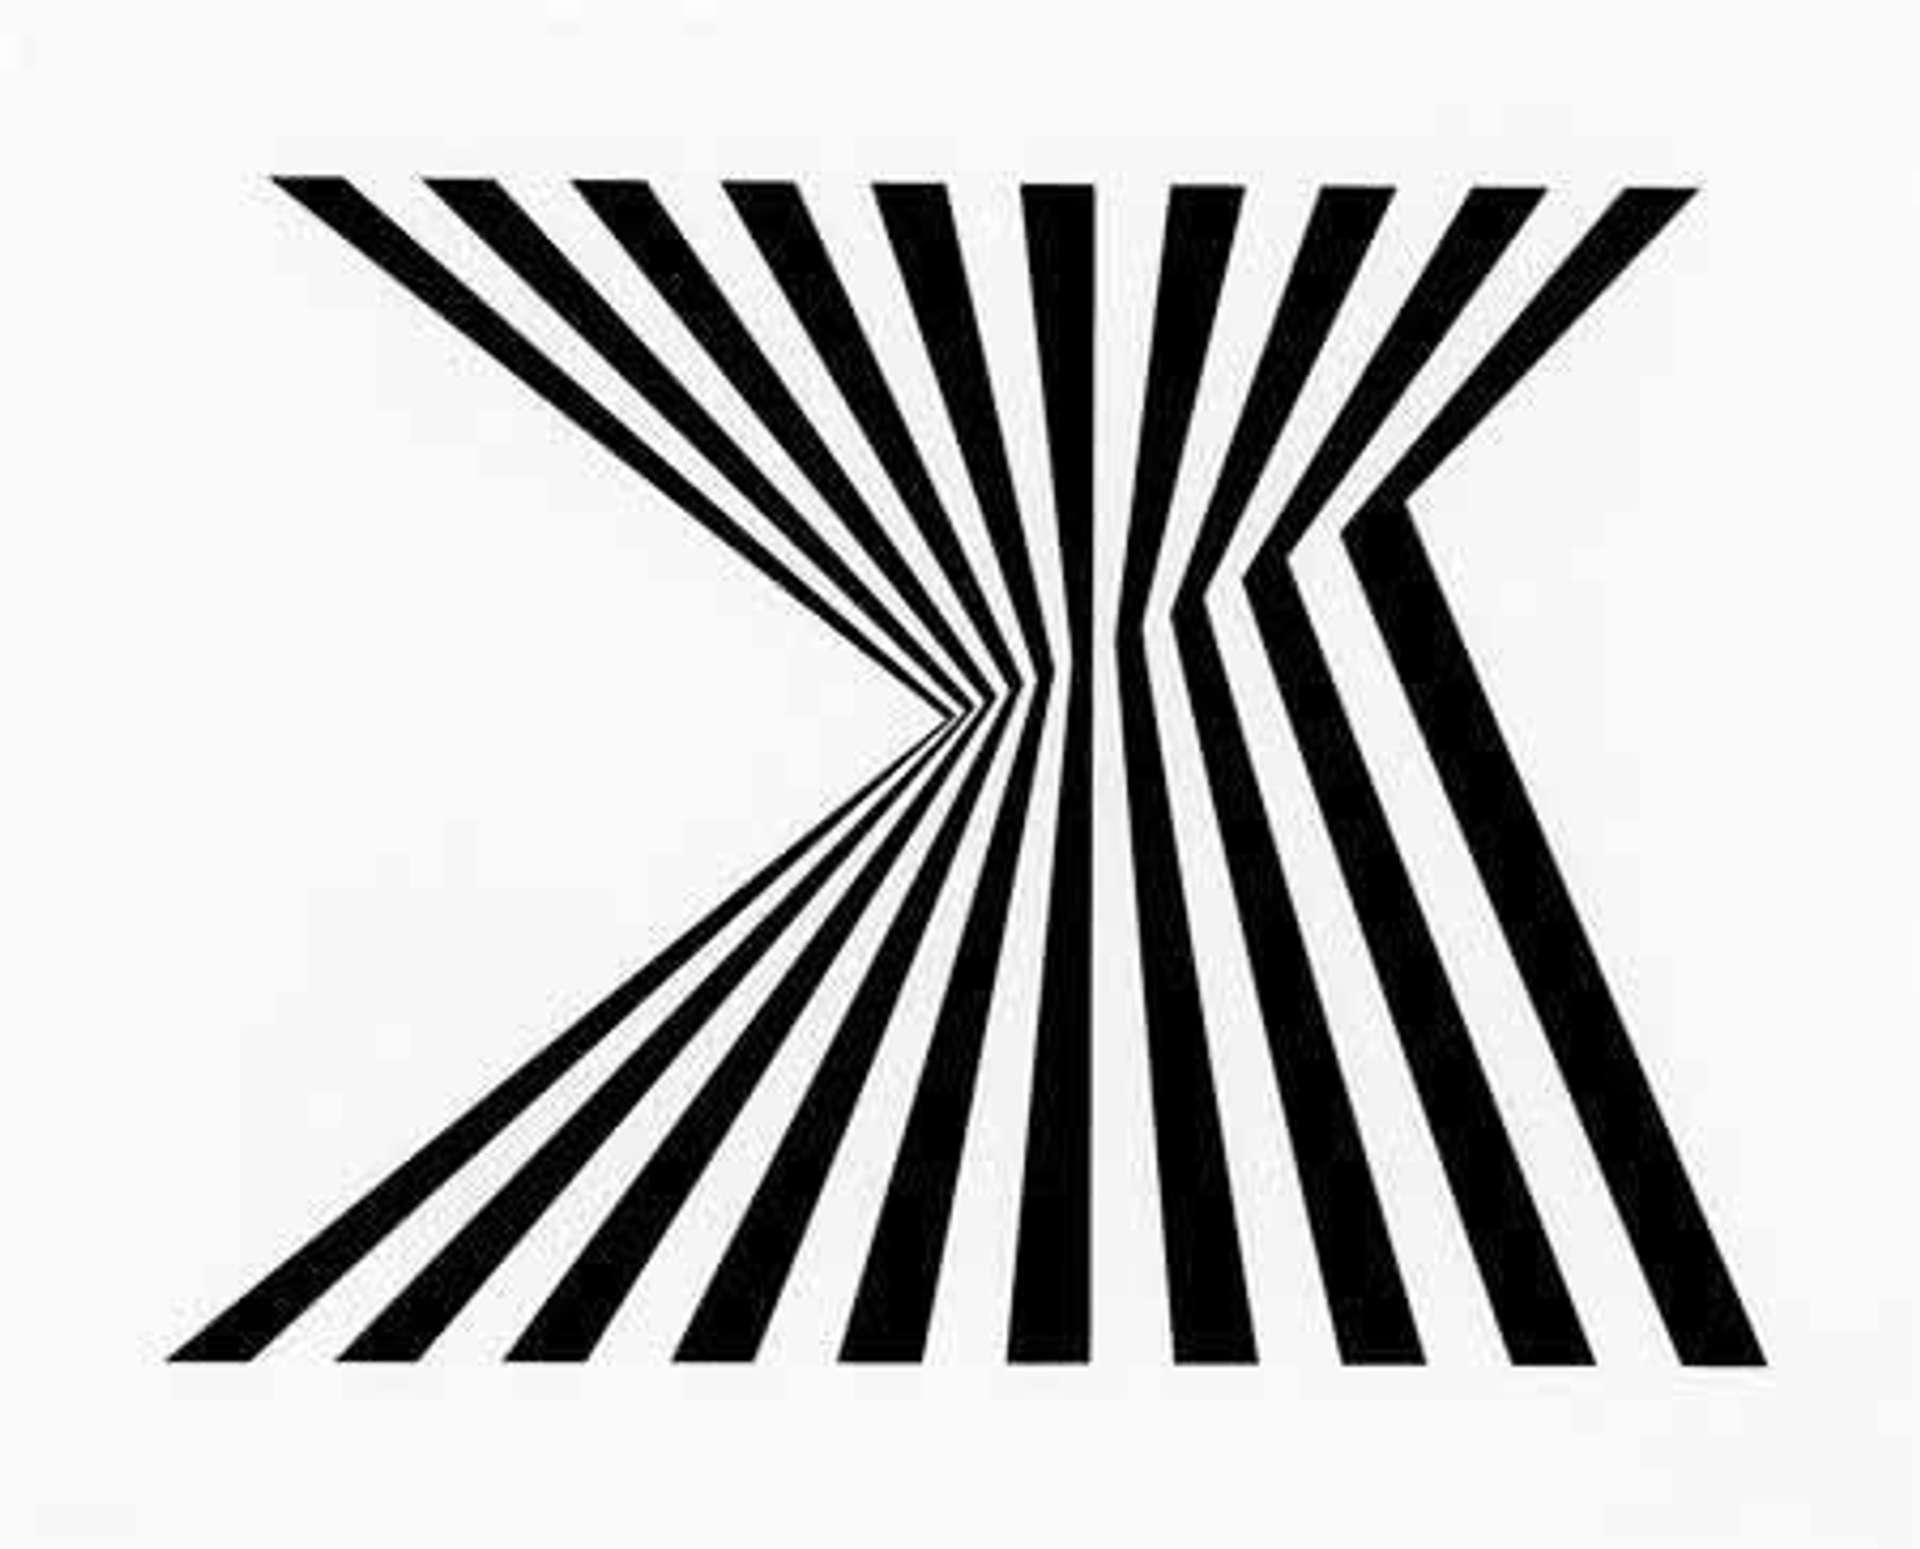 Ten black lines, against a white background, reach from the top and bottom of the artwork. The lines meet near the centre of the composition, converging at different points to produce an optical illusion.